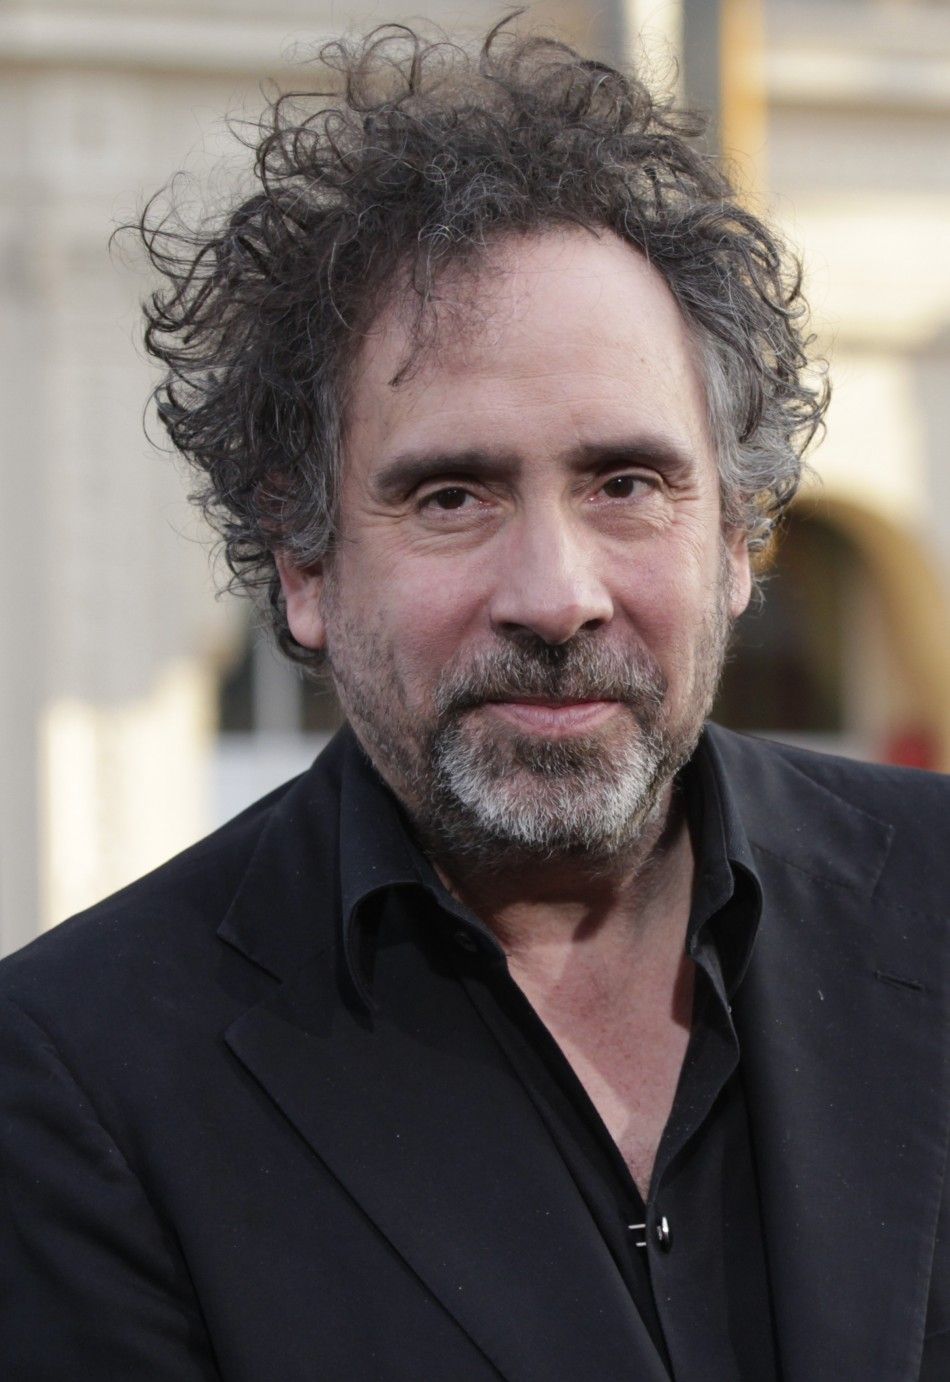 Director of the movie Tim Burton poses at the premiere of quotDark Shadowsquot at the Graumans Chinese theatre in Hollywood, California May 7, 2012.